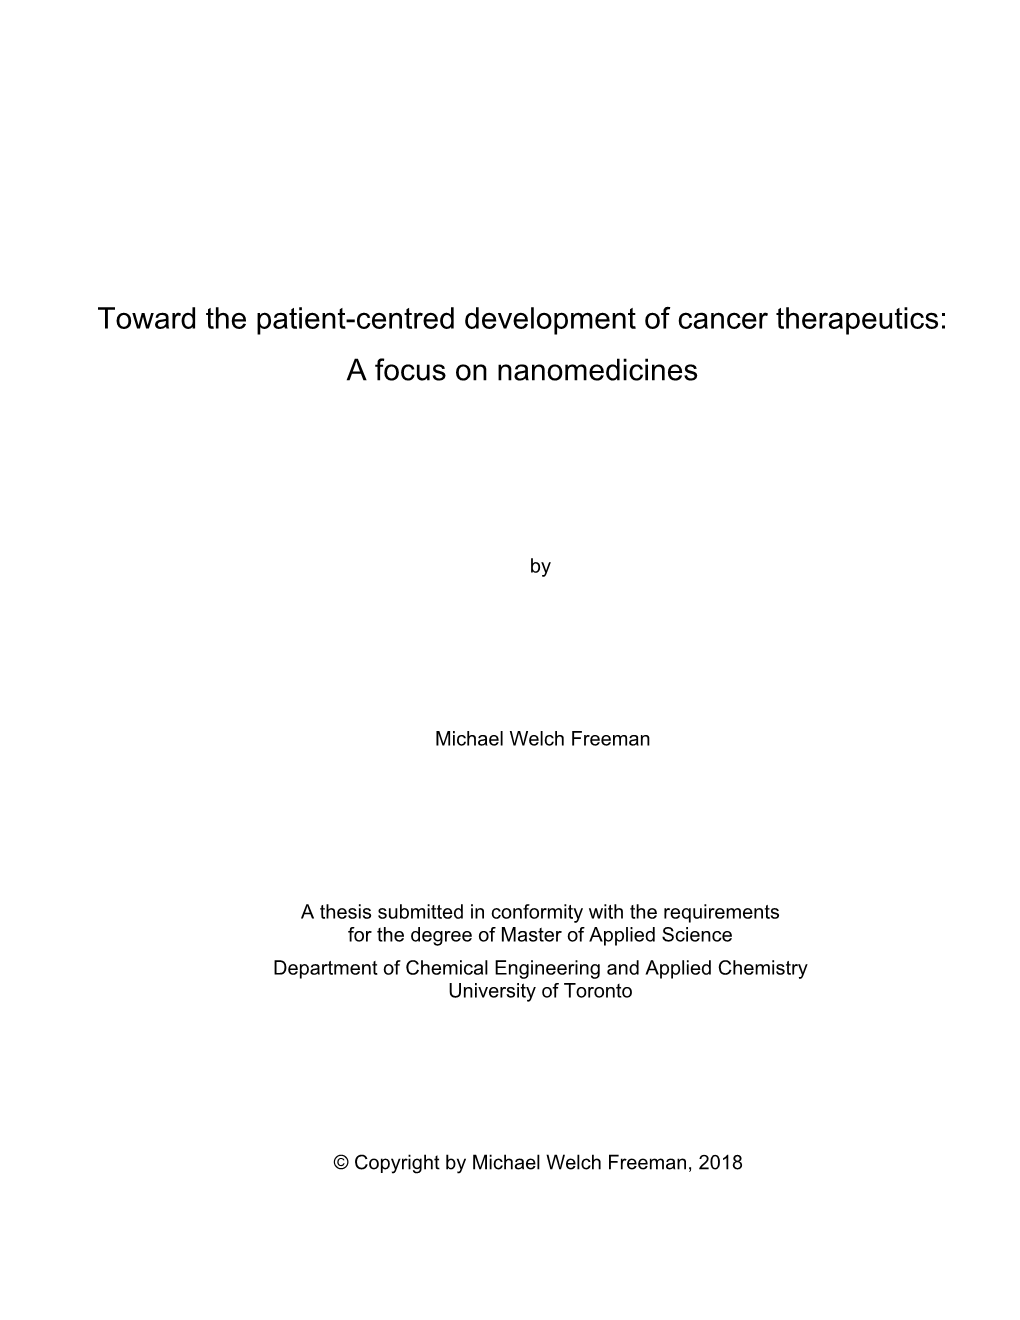 Toward the Patient-Centred Development of Cancer Therapeutics: a Focus on Nanomedicines